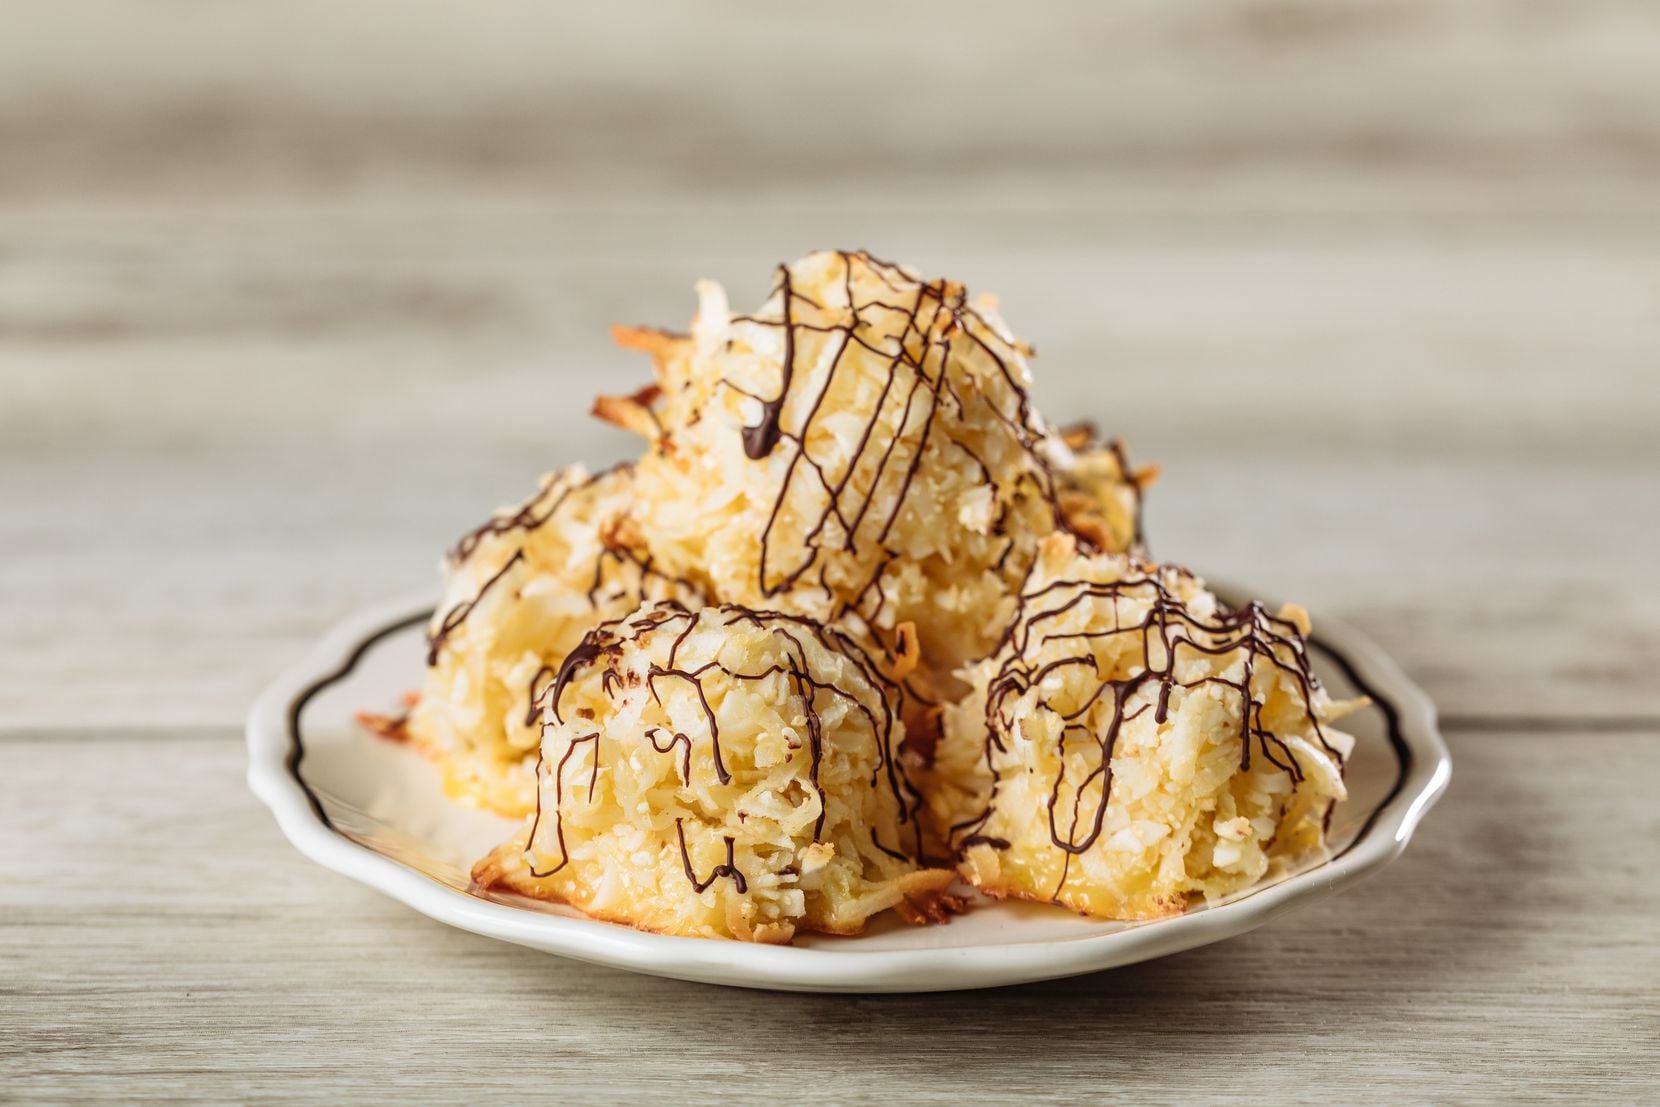 Eatzi's Market and Bakery will offer coconut macaroons as part of its 2020 Passover menu.